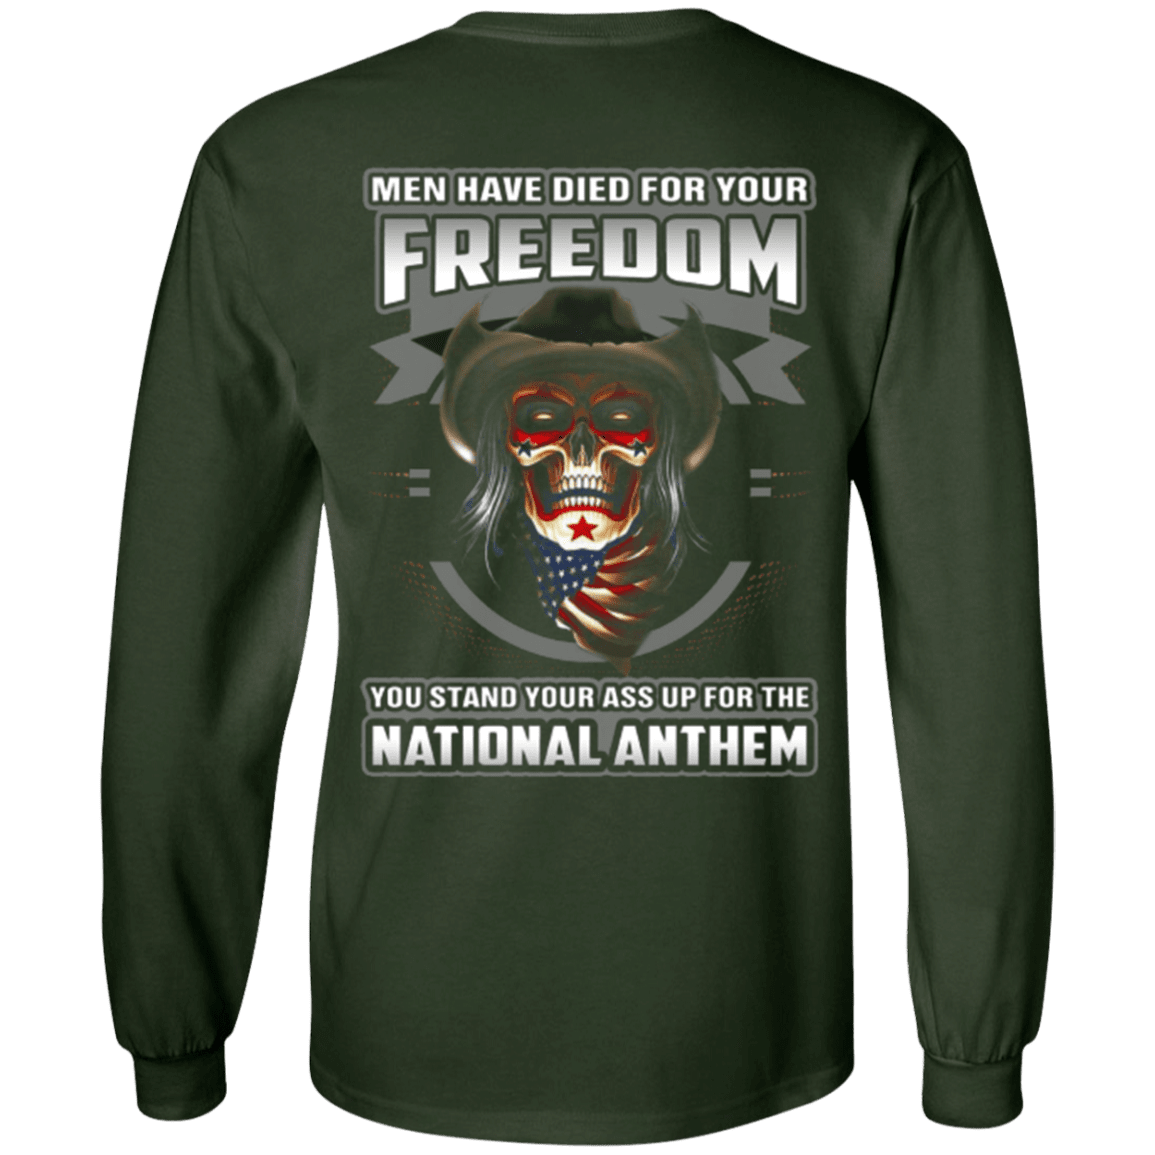 Military T-Shirt "Men Have Died For Your Freedom Stand Up For The National Anthem"-TShirt-General-Veterans Nation